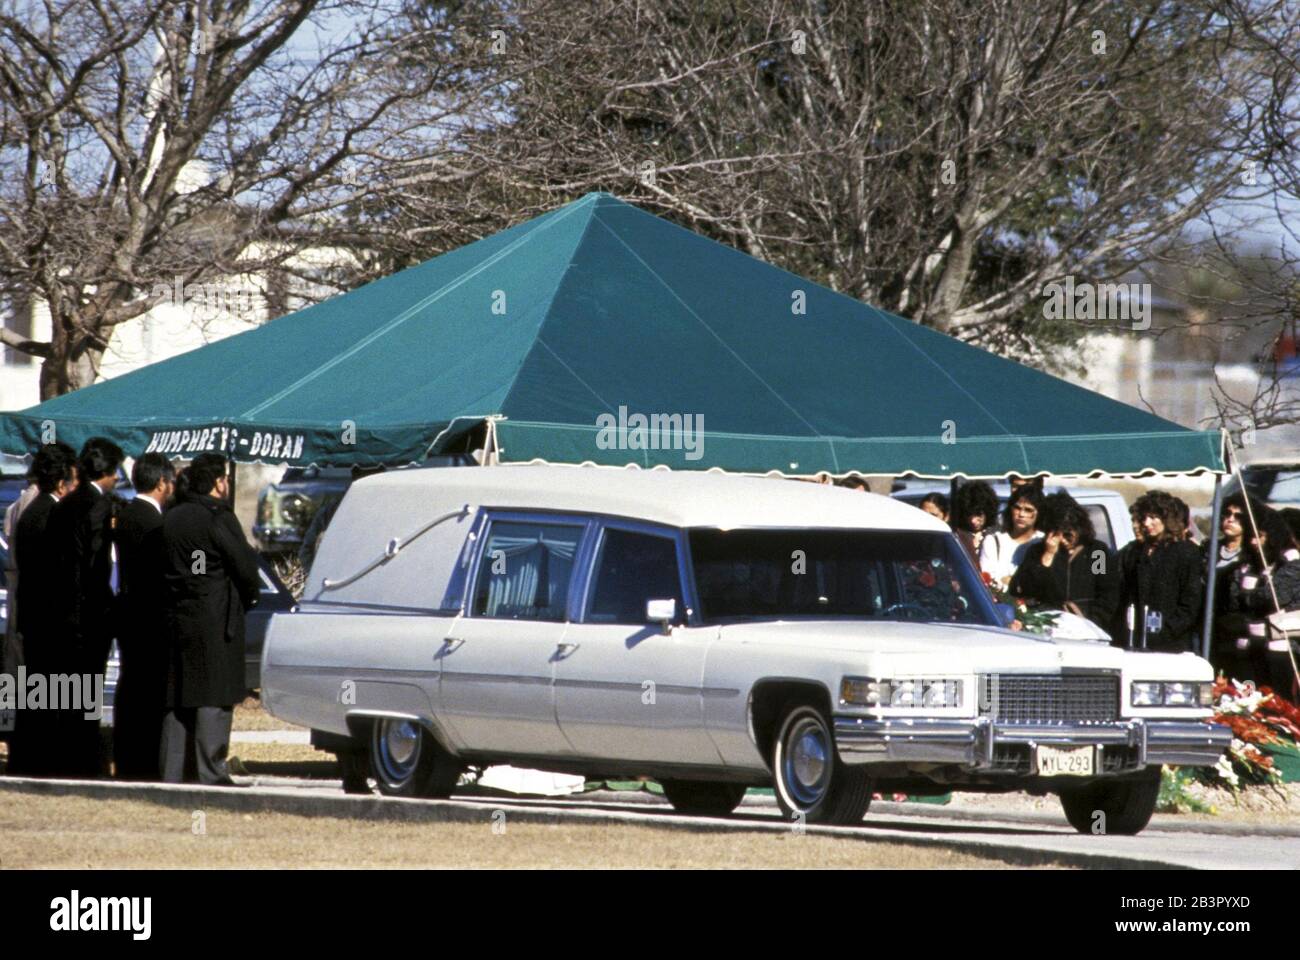 Del Rio Texas USA (undated): Mourners gather around gravesite in cemetery as white hearse bears basket of the deceased at South Texas funeral. ©Bob Daemmrich Stock Photo